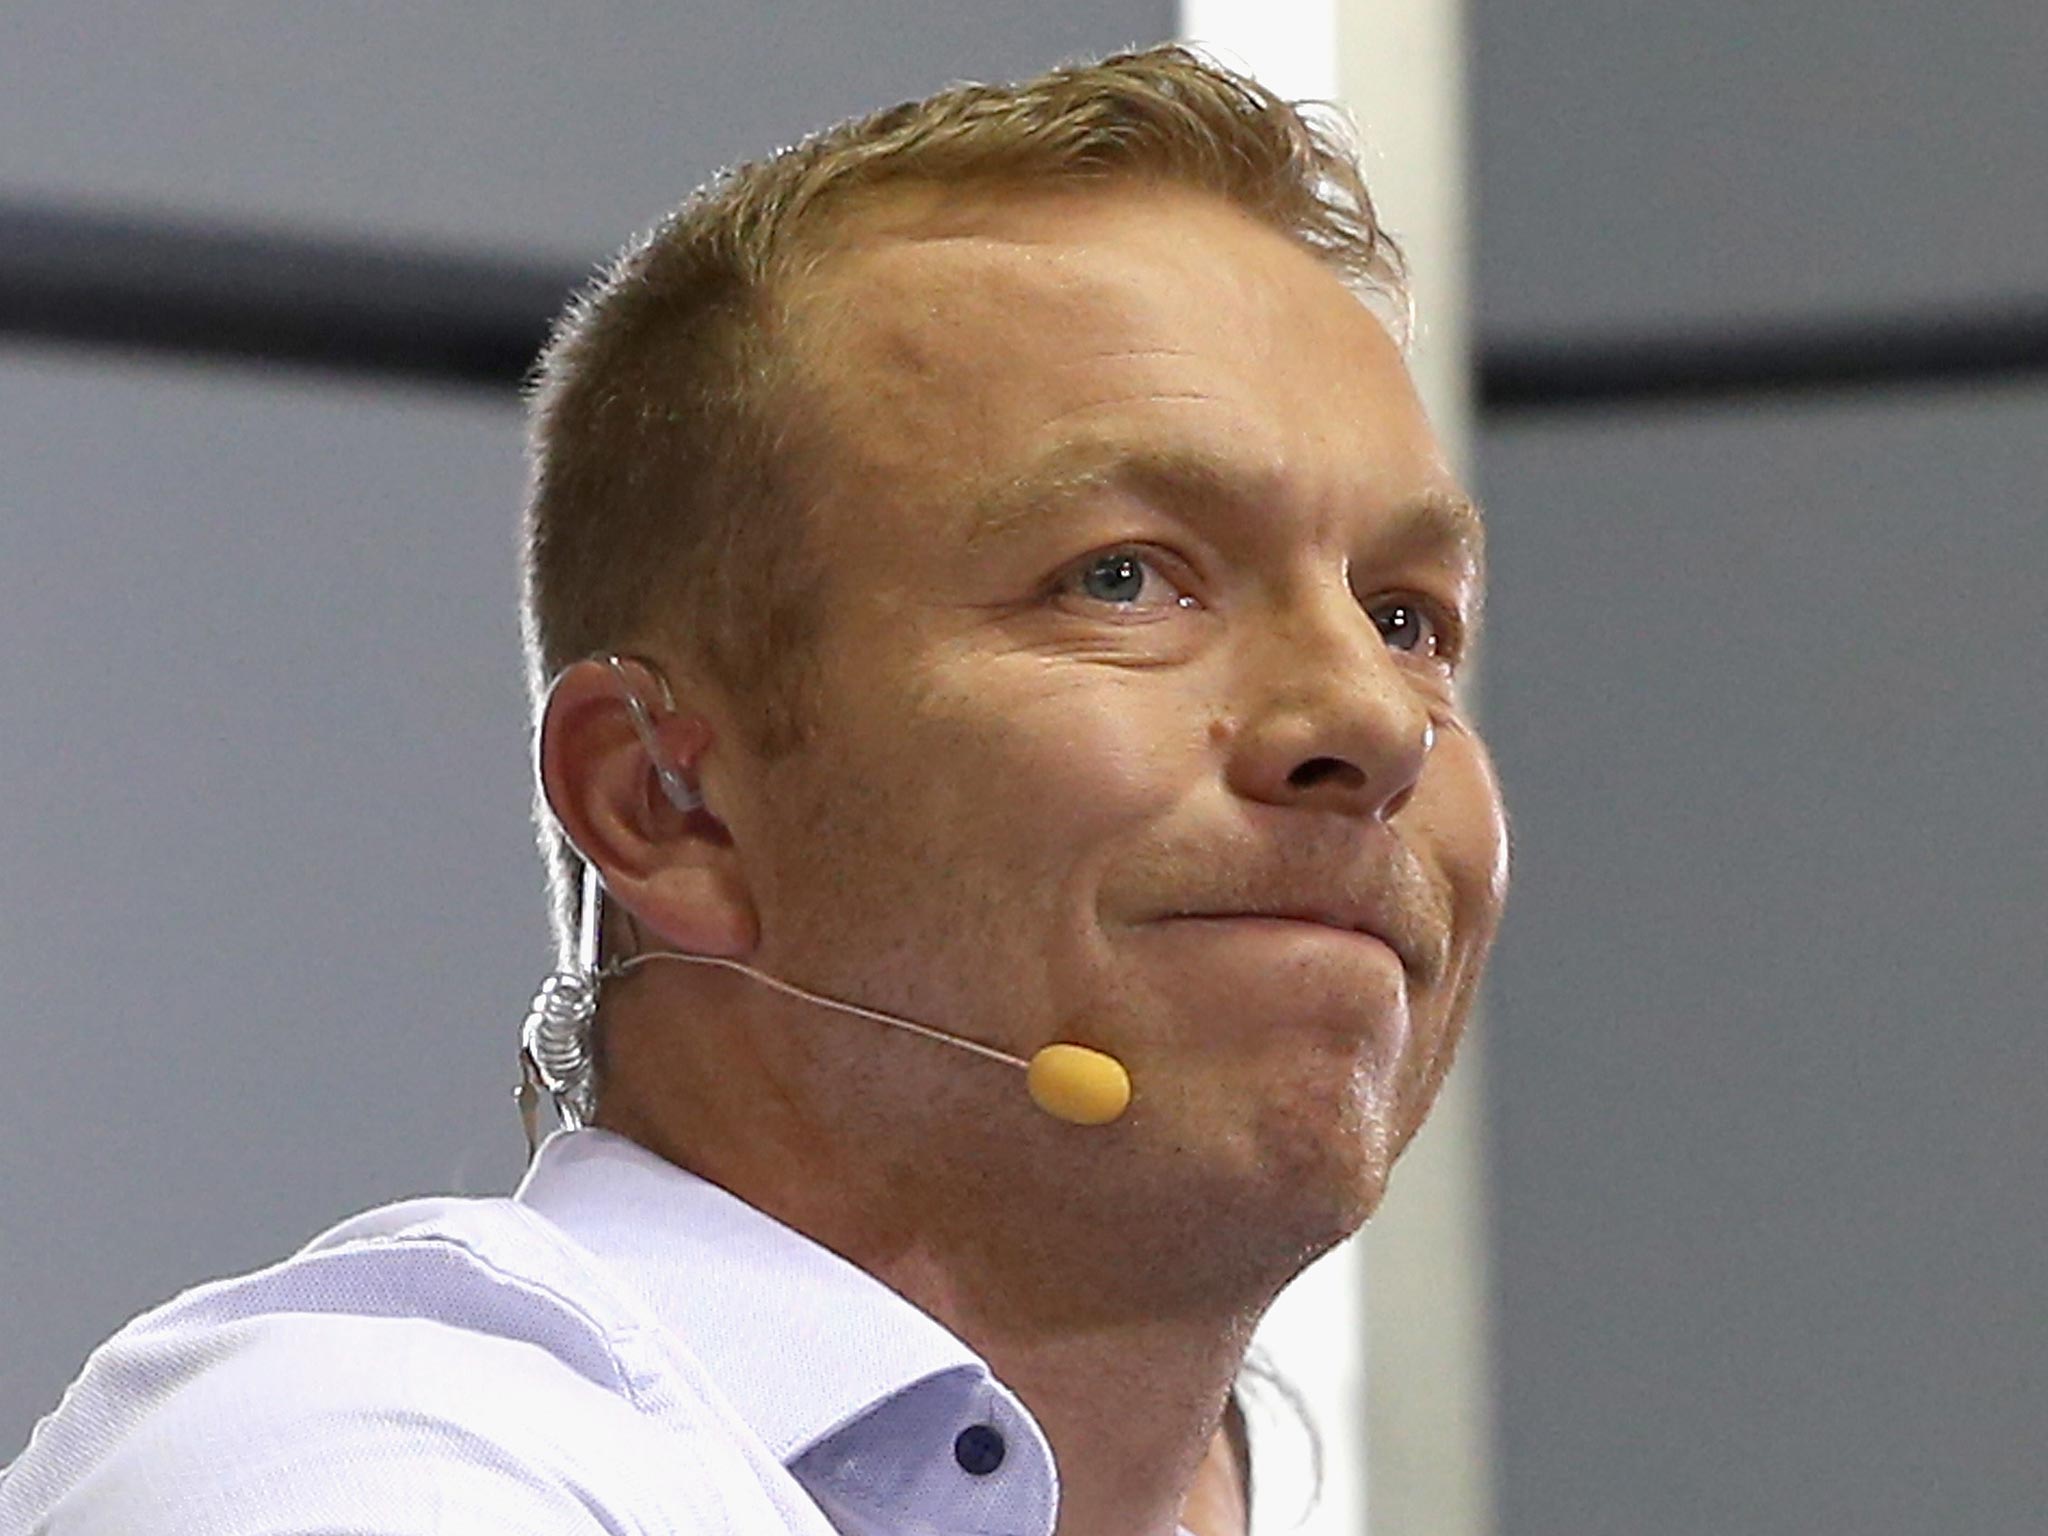 Chris Hoy was asked for identification when he tried to enter the velodrome named after him